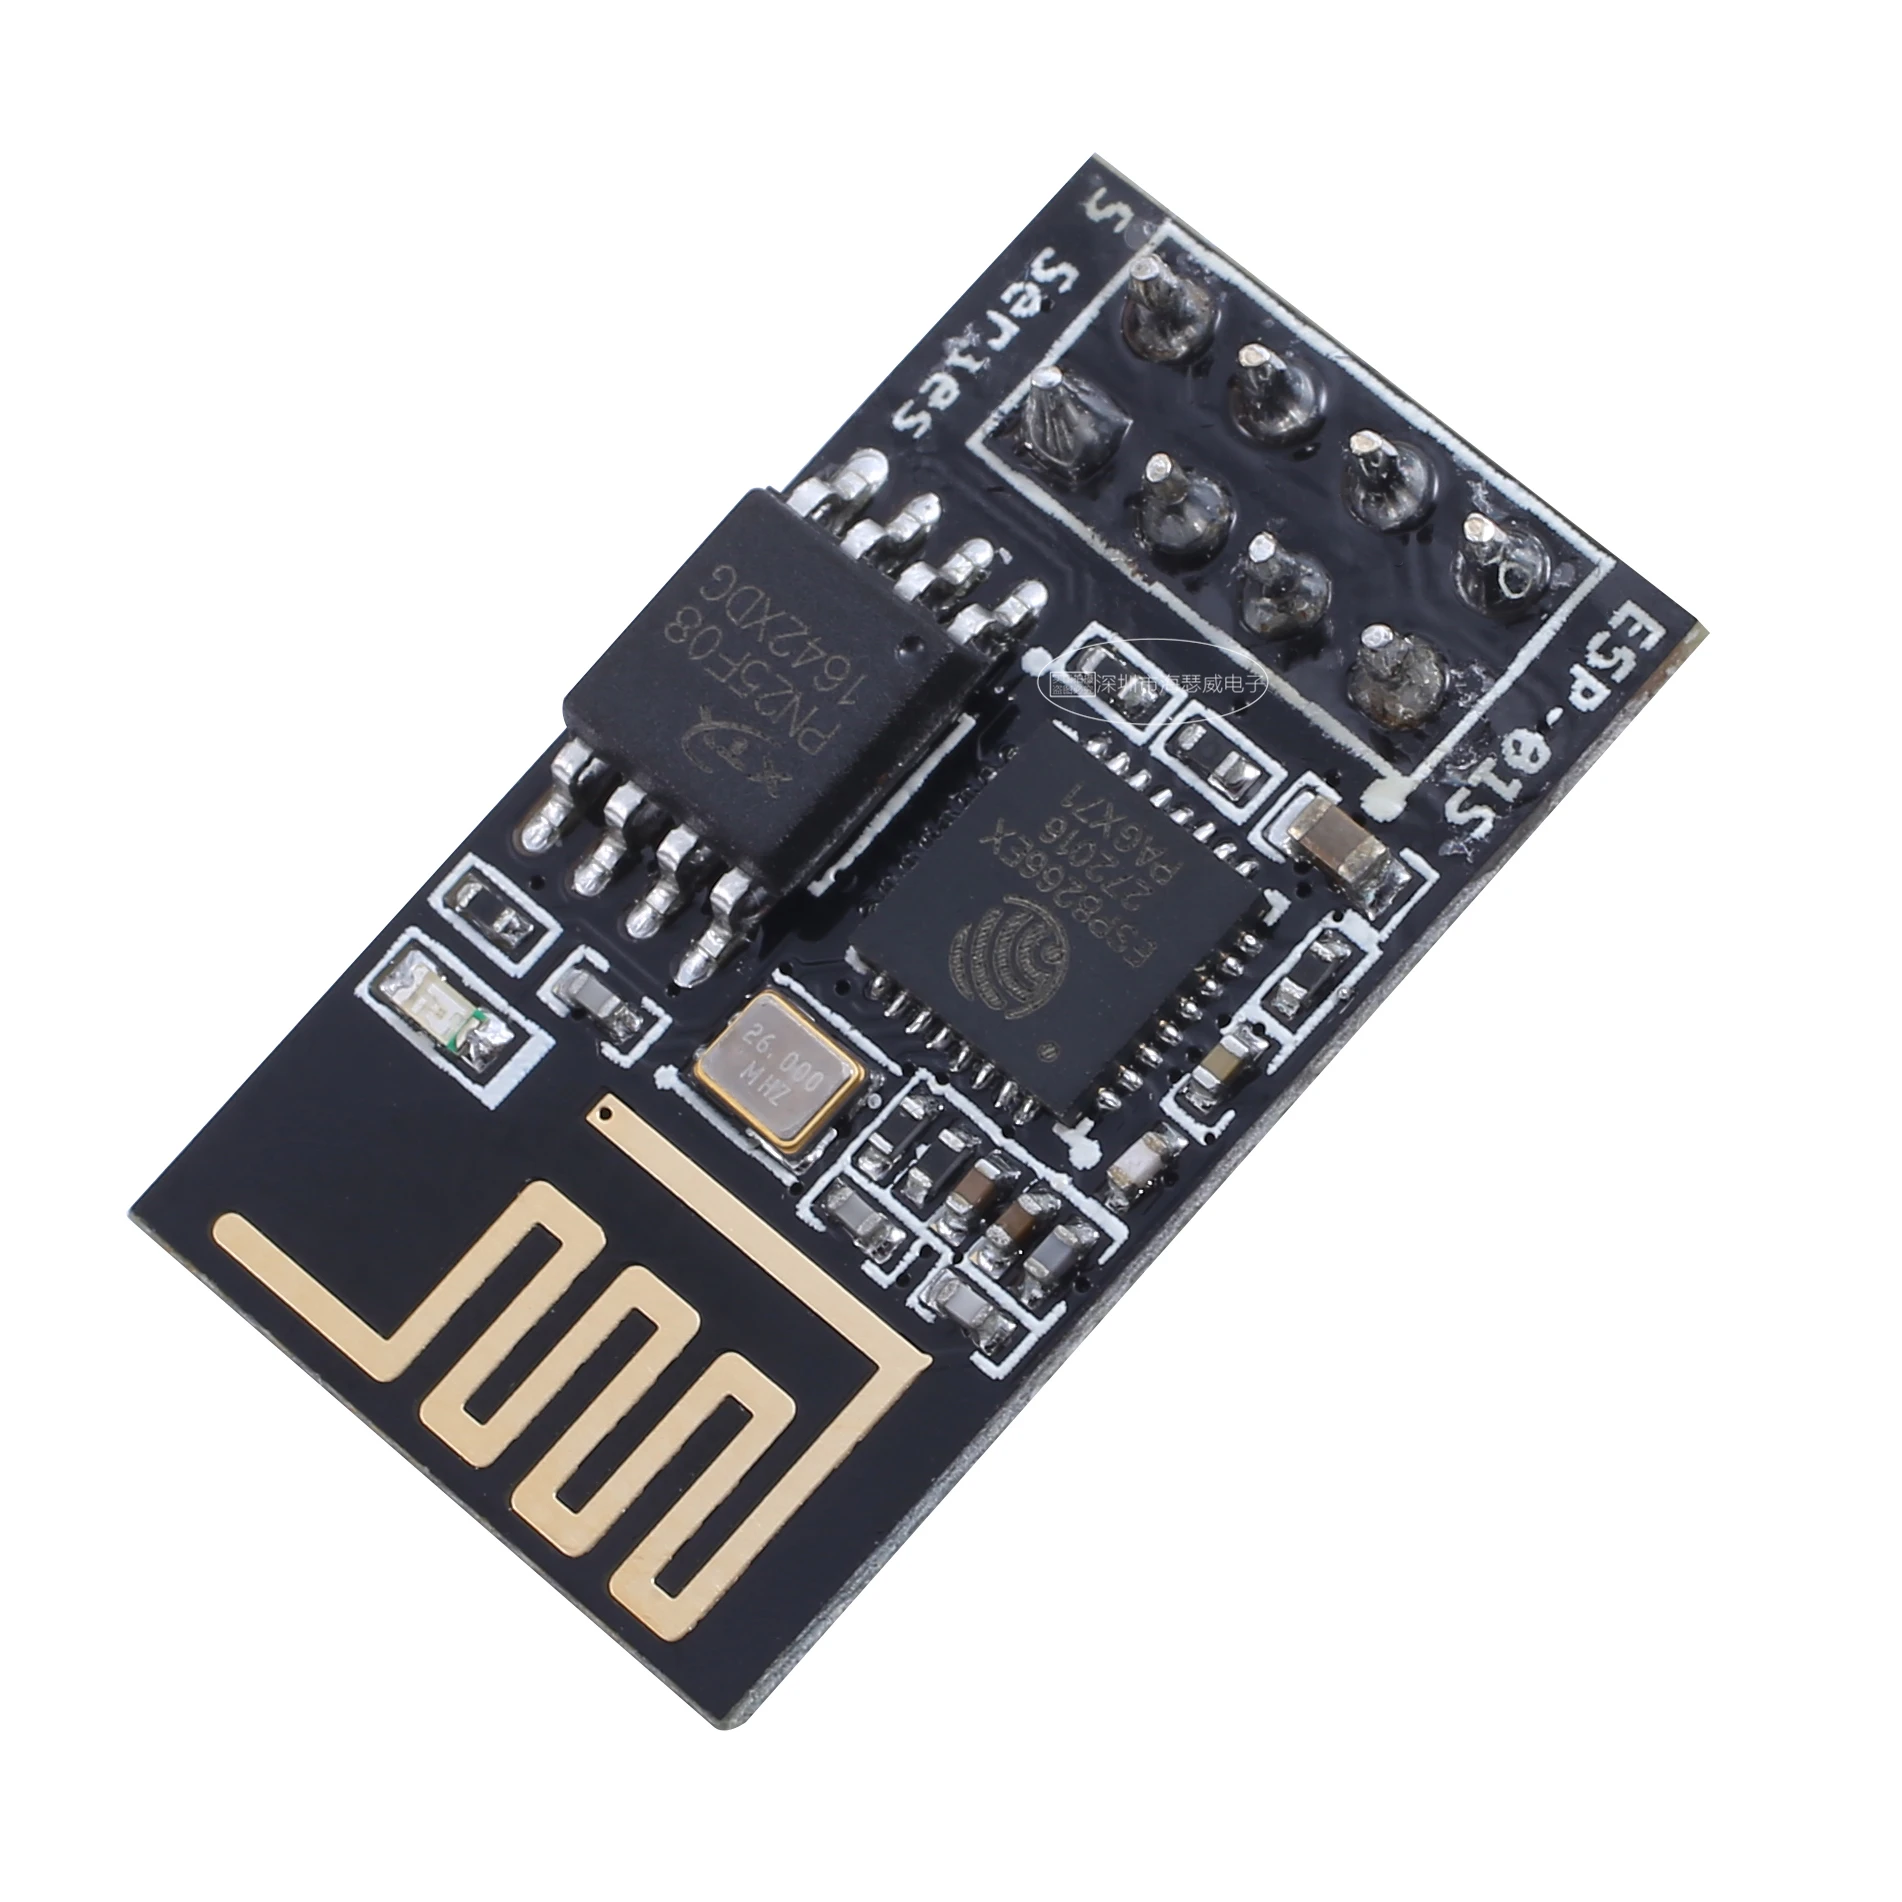 

ESP-01S 8266 serial port to WIFI industrial grade low power consumption wireless module